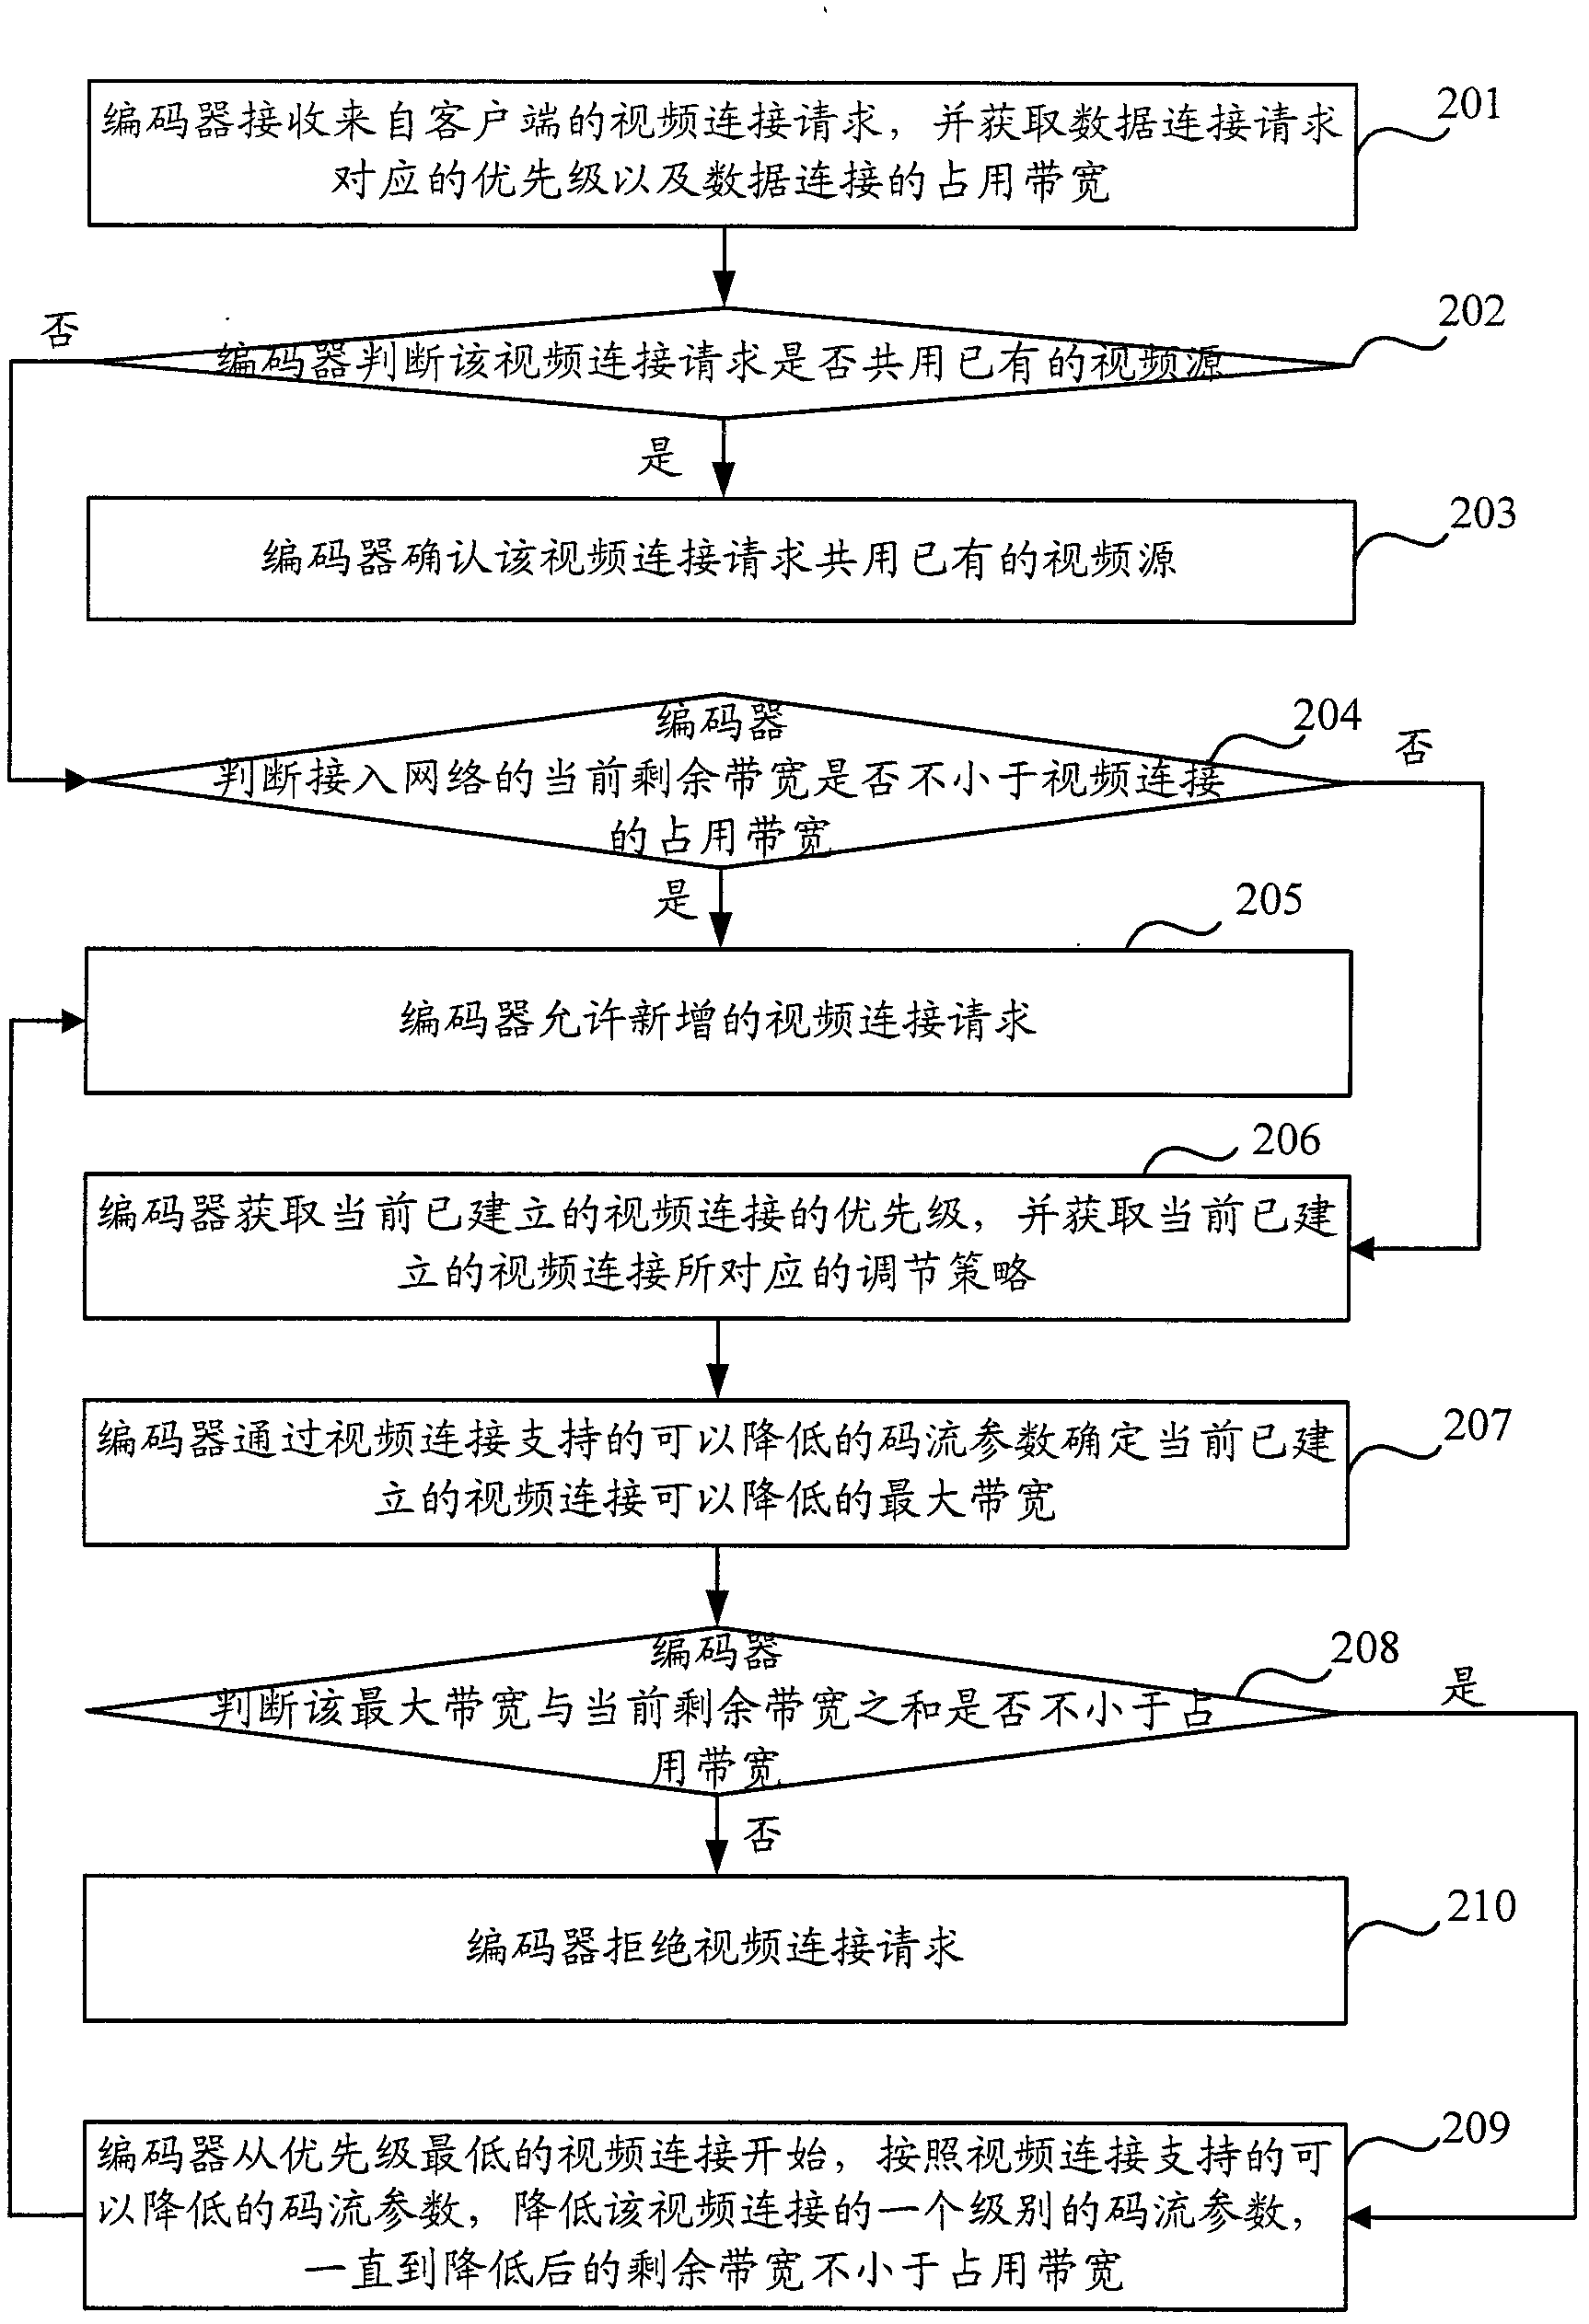 Video connection control method and equipment